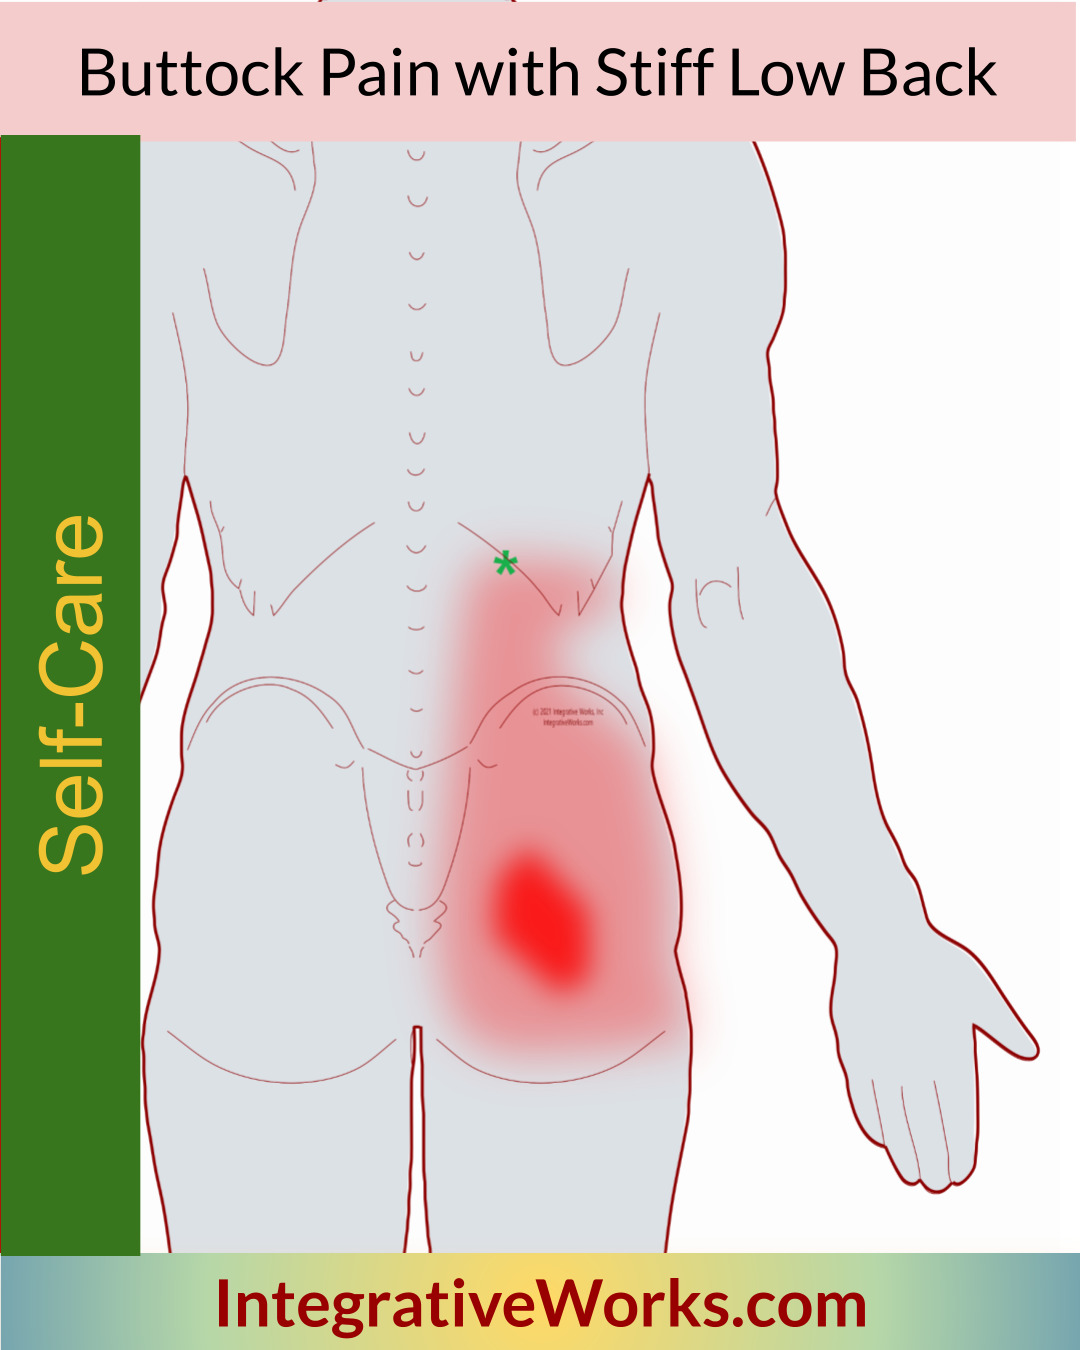 Self-Care – Buttock Pain with Stiff Low-Back